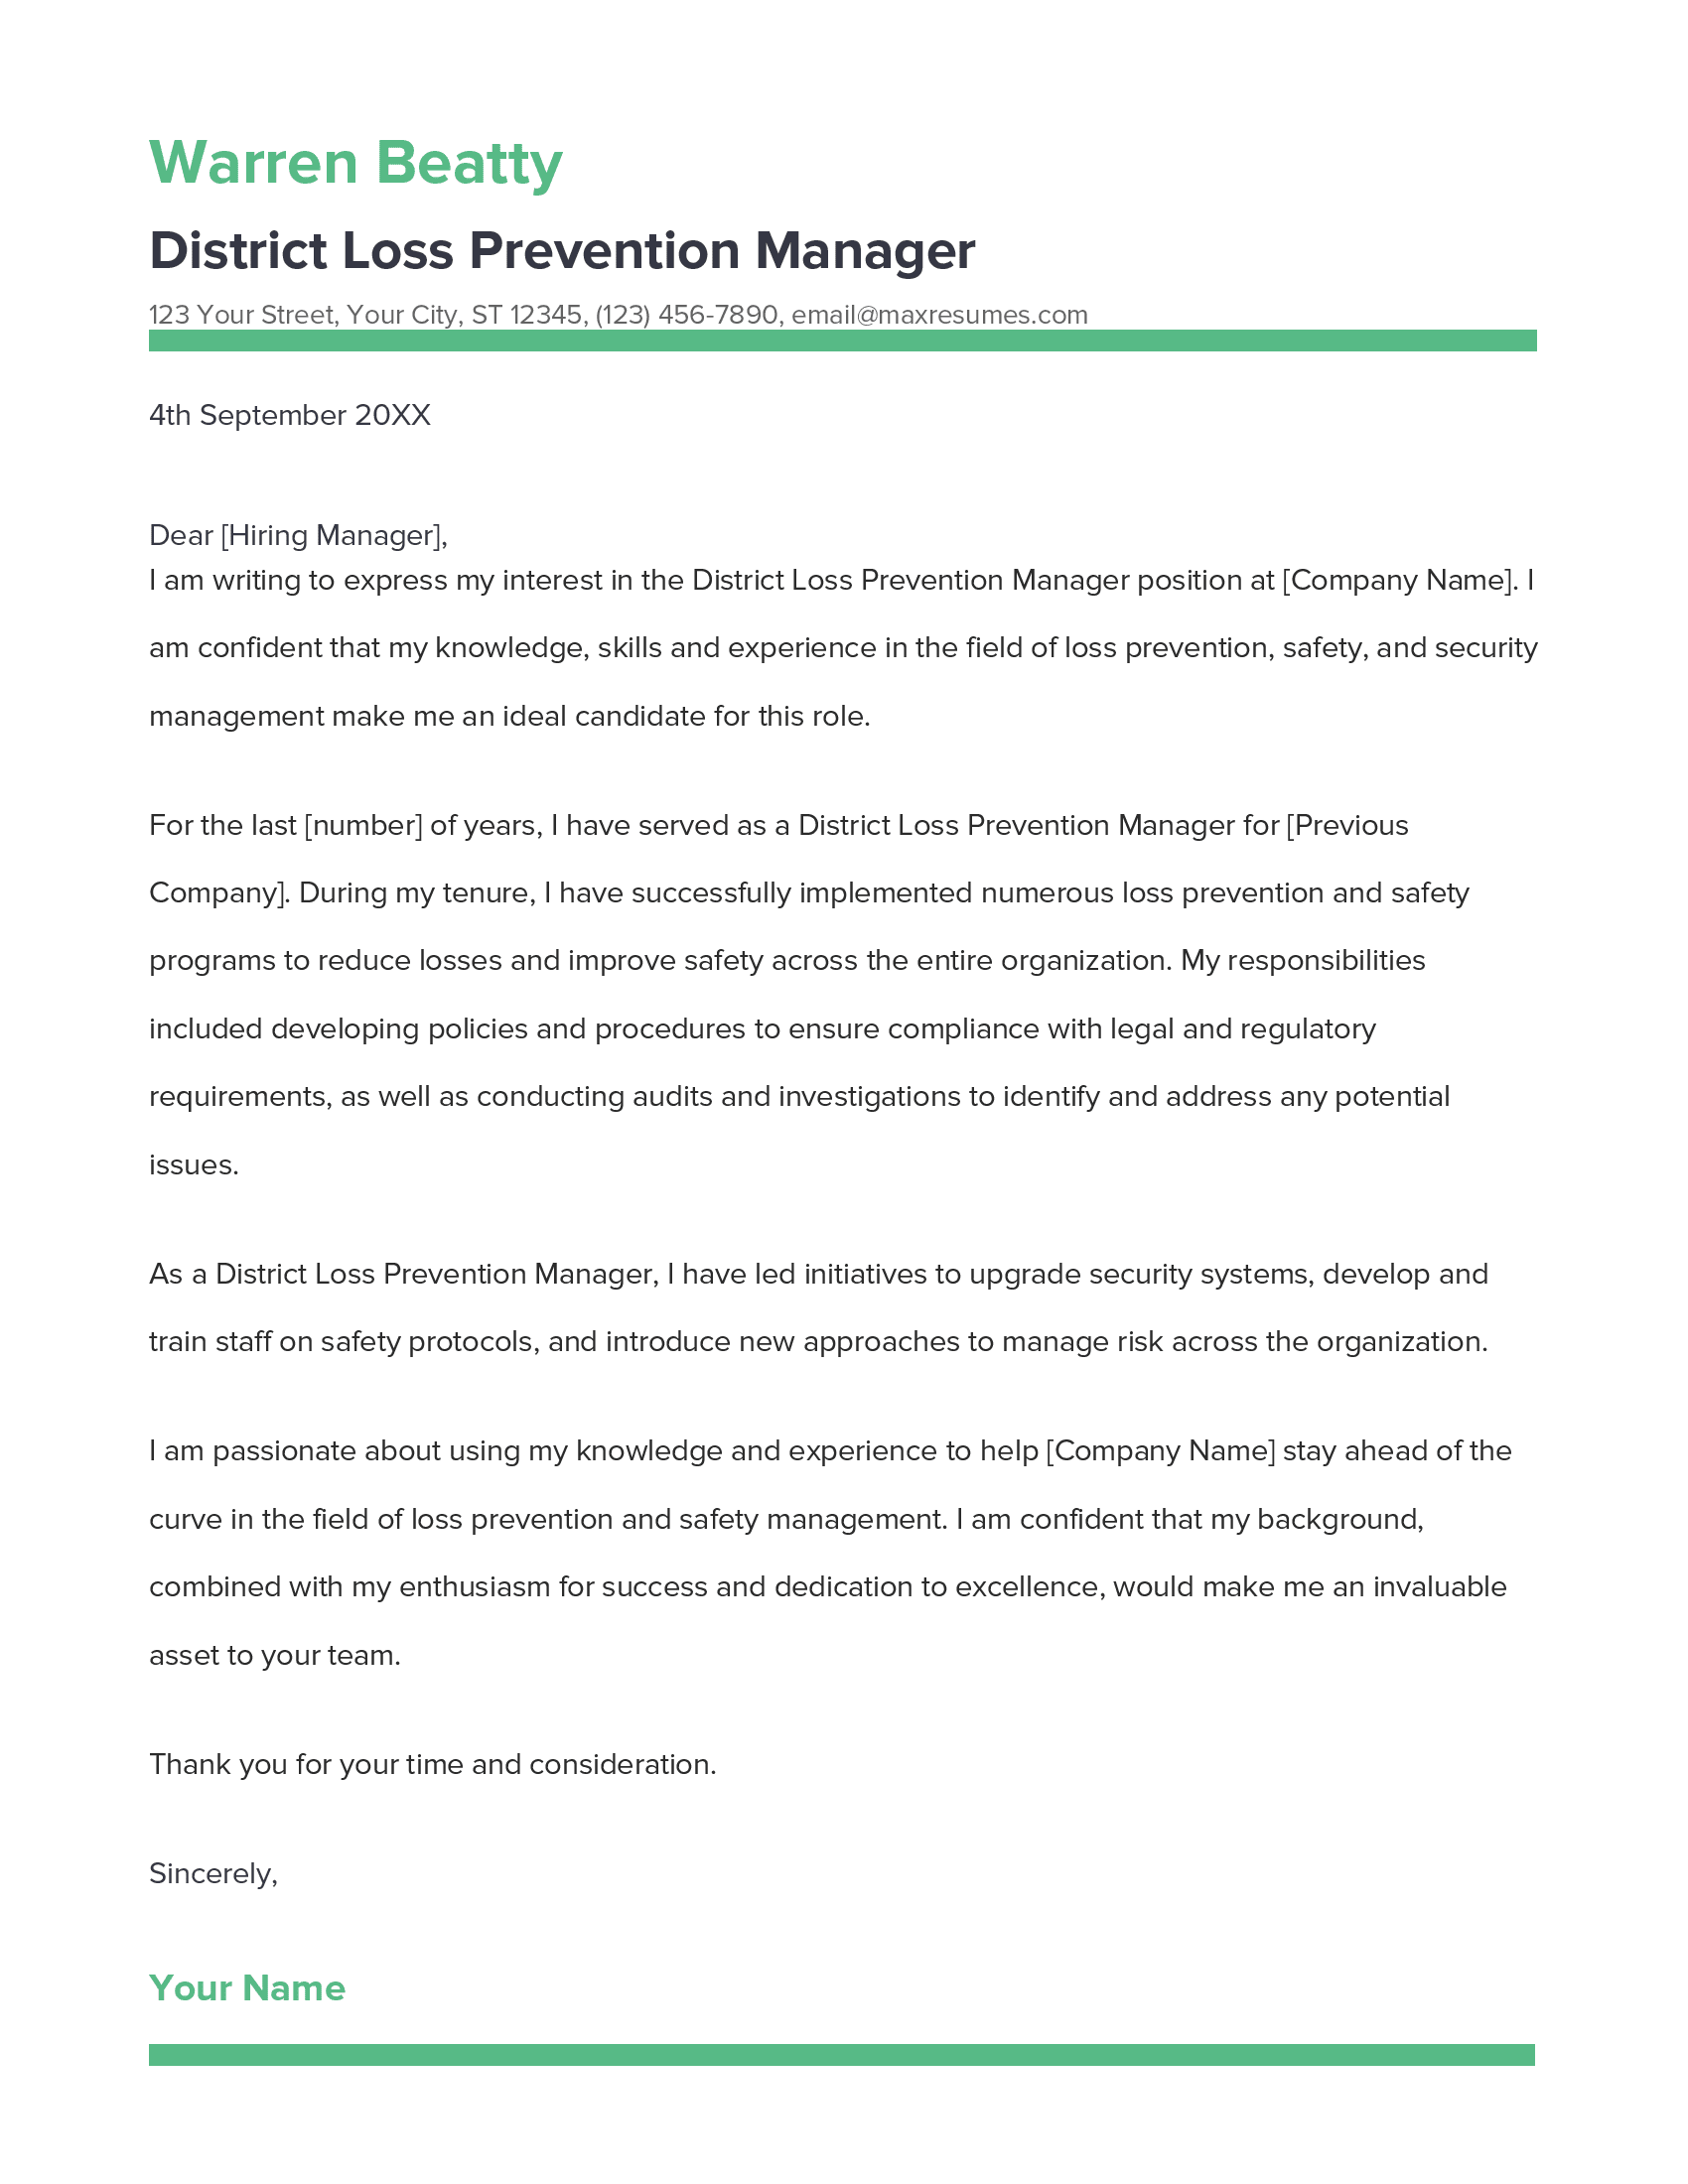 District Loss Prevention Manager Cover Letter Example